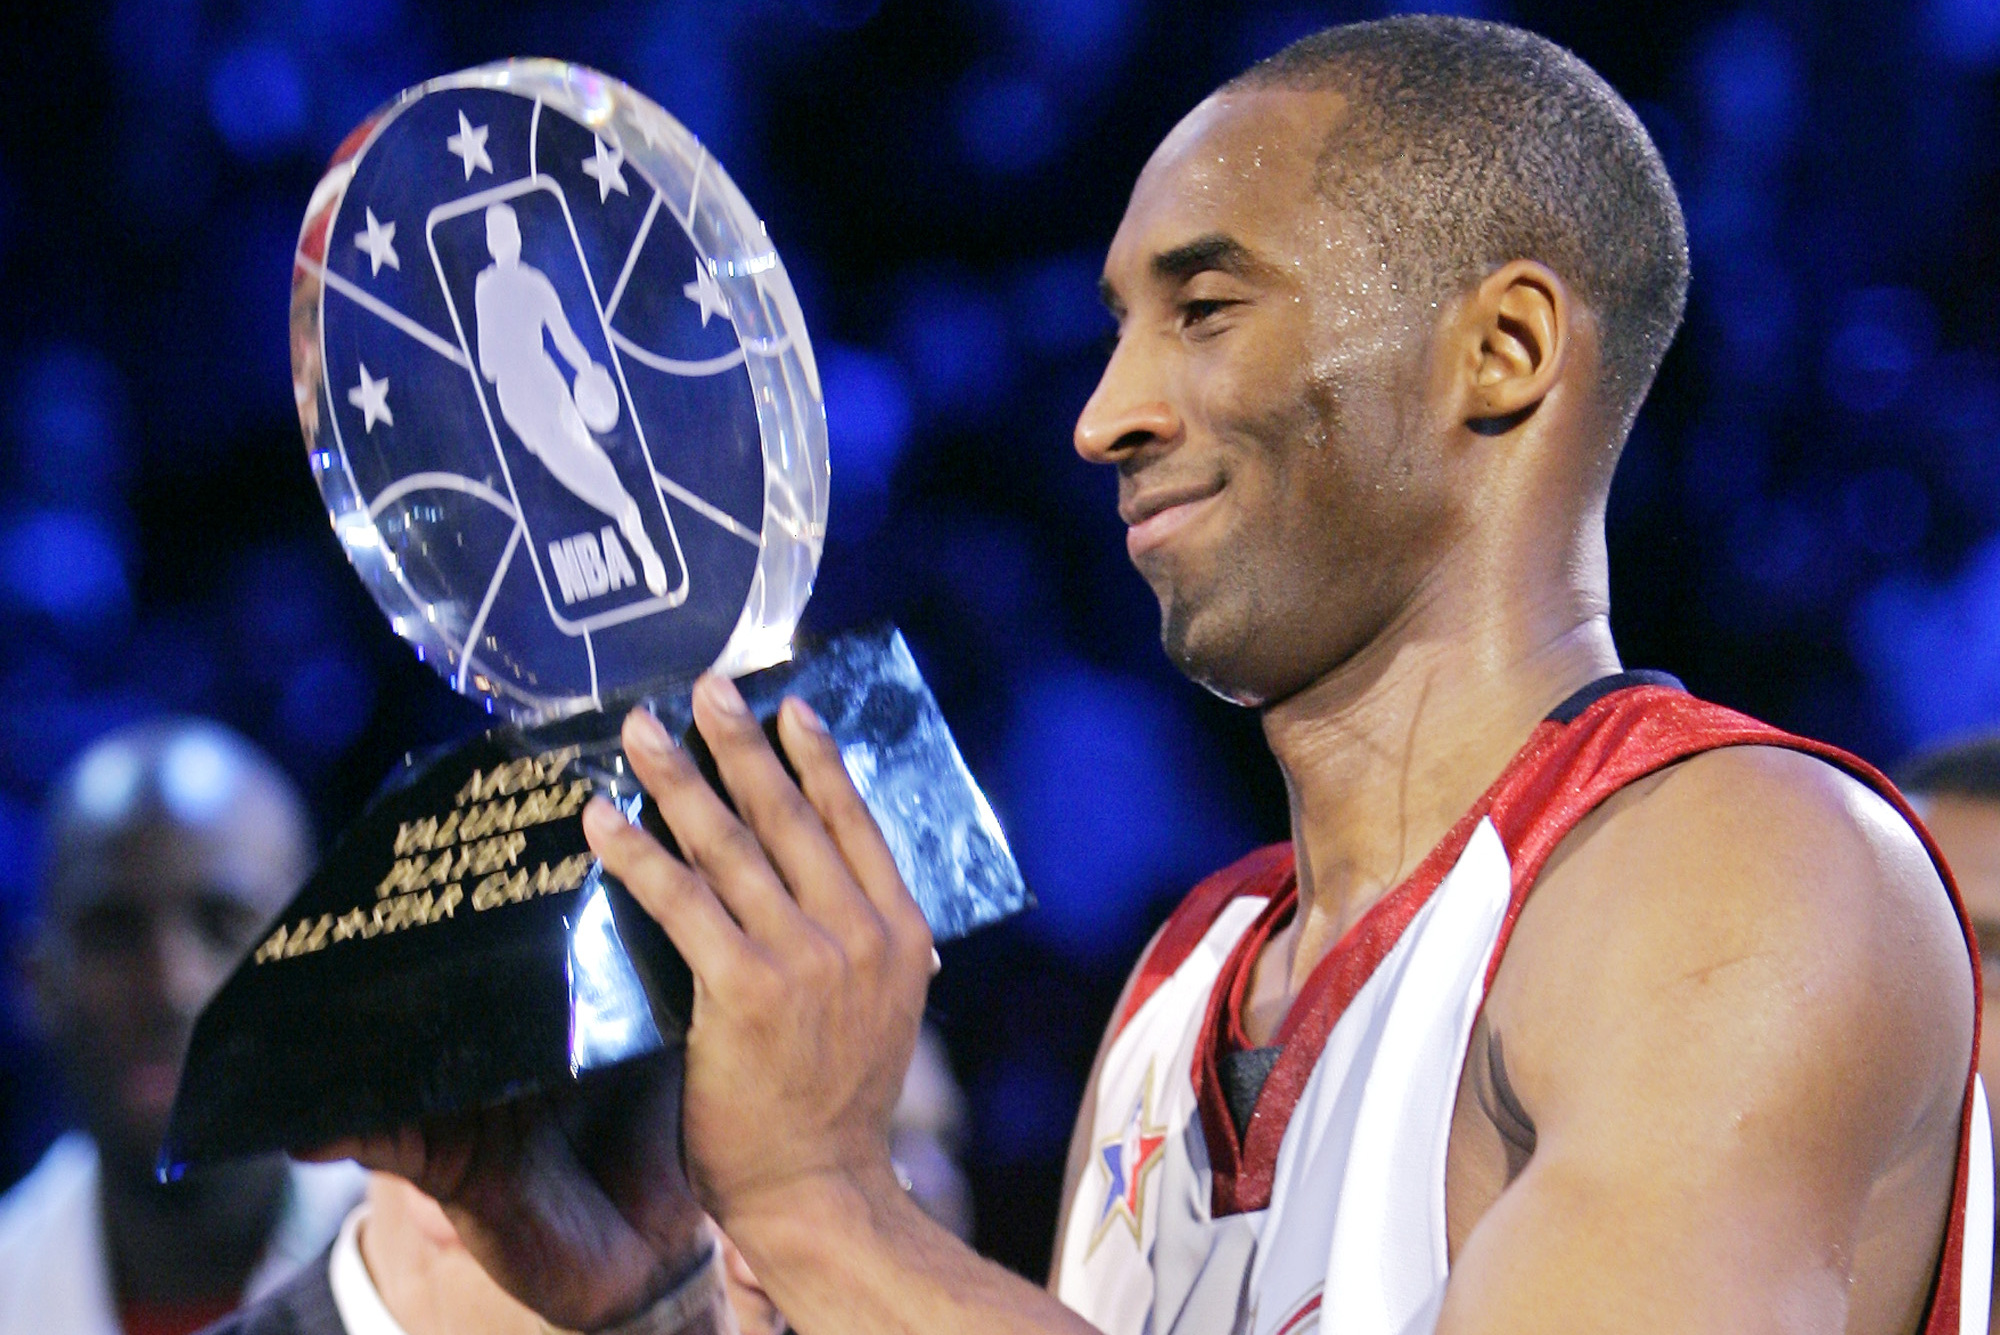 All-Star Weekend in Philly: Former NBA players look back on the 2002 event  and remember Kobe Bryant